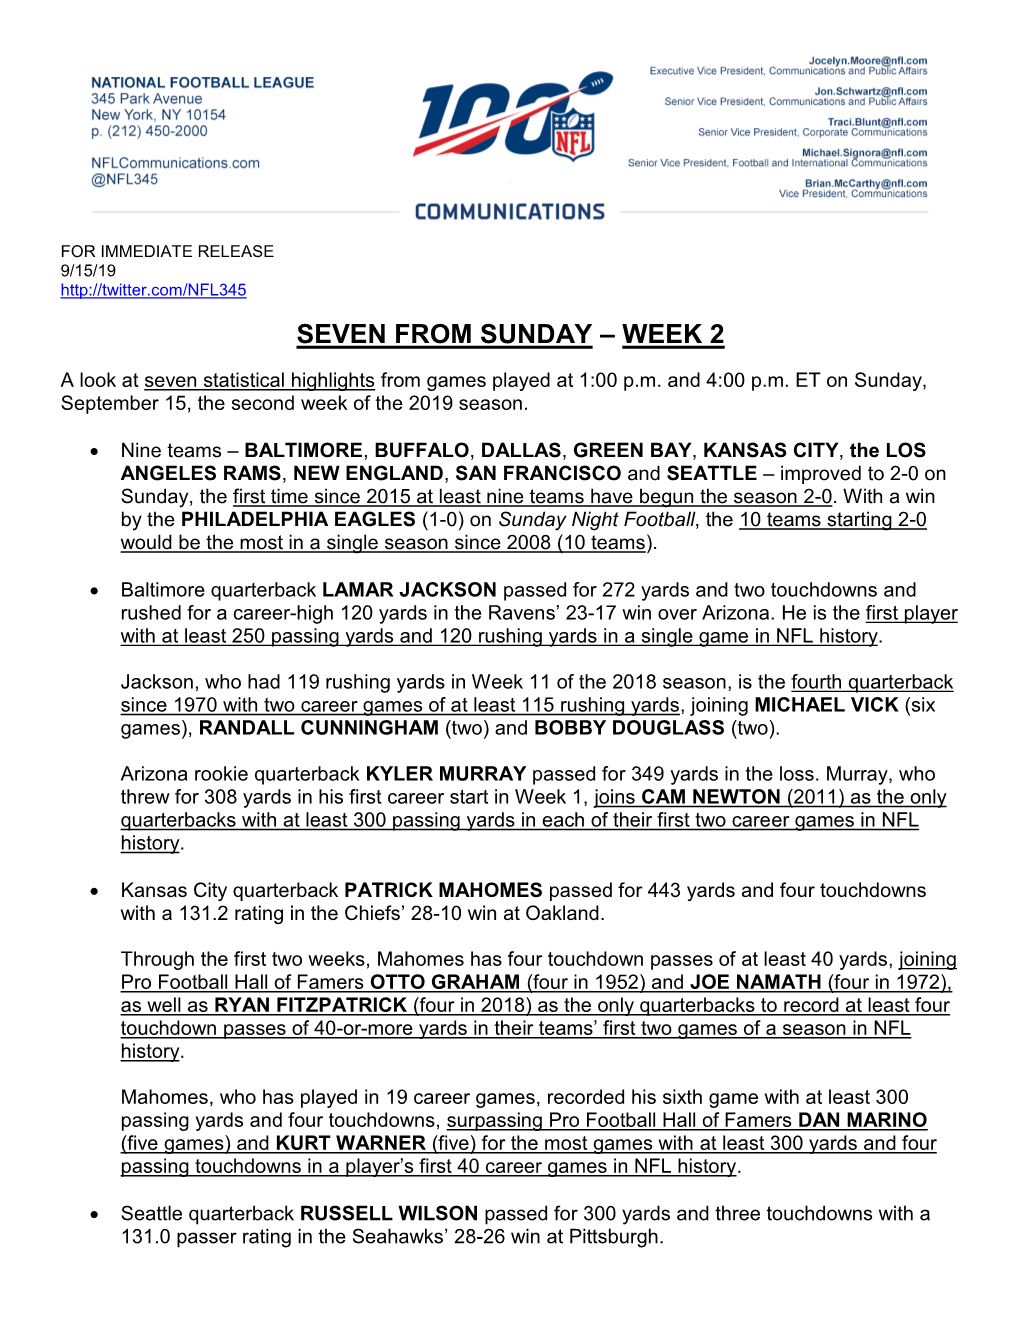 Seven from Sunday – Week 2